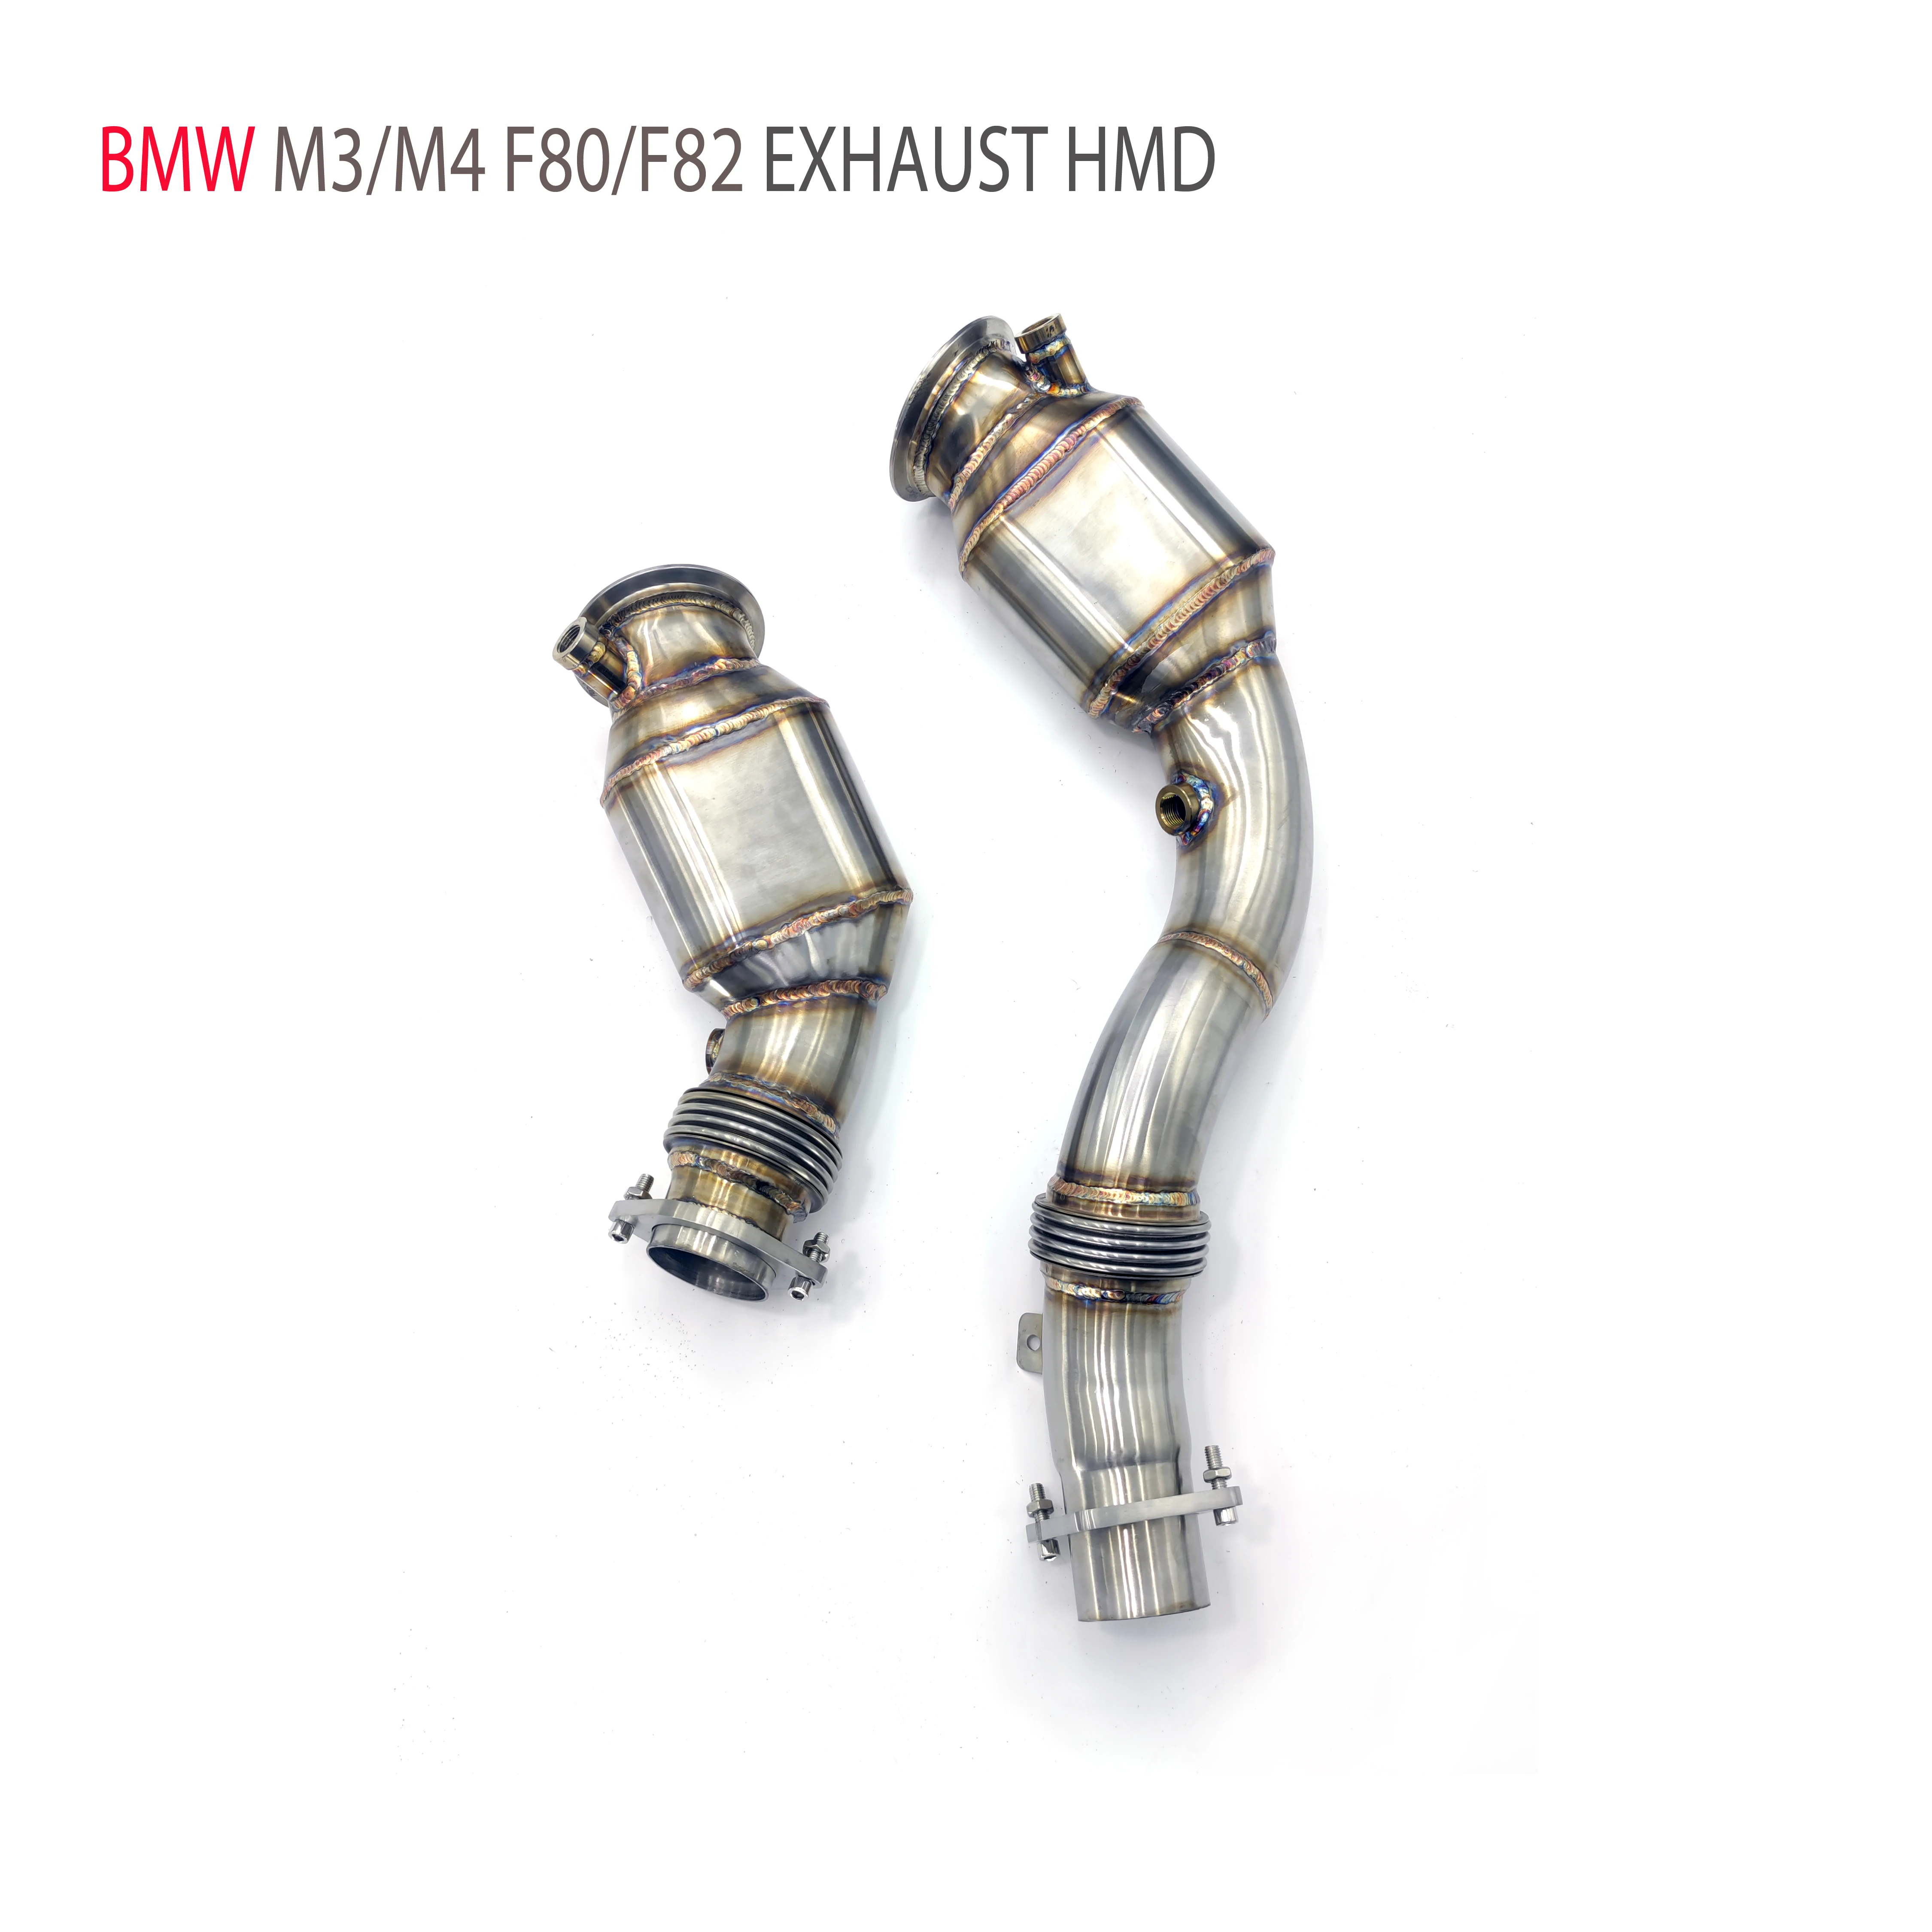 

HMD Exhaust System High Flow Performance Downpipe for BMW M3 M4 F80 F82 With Catalytic Header Without Thermal Insulation